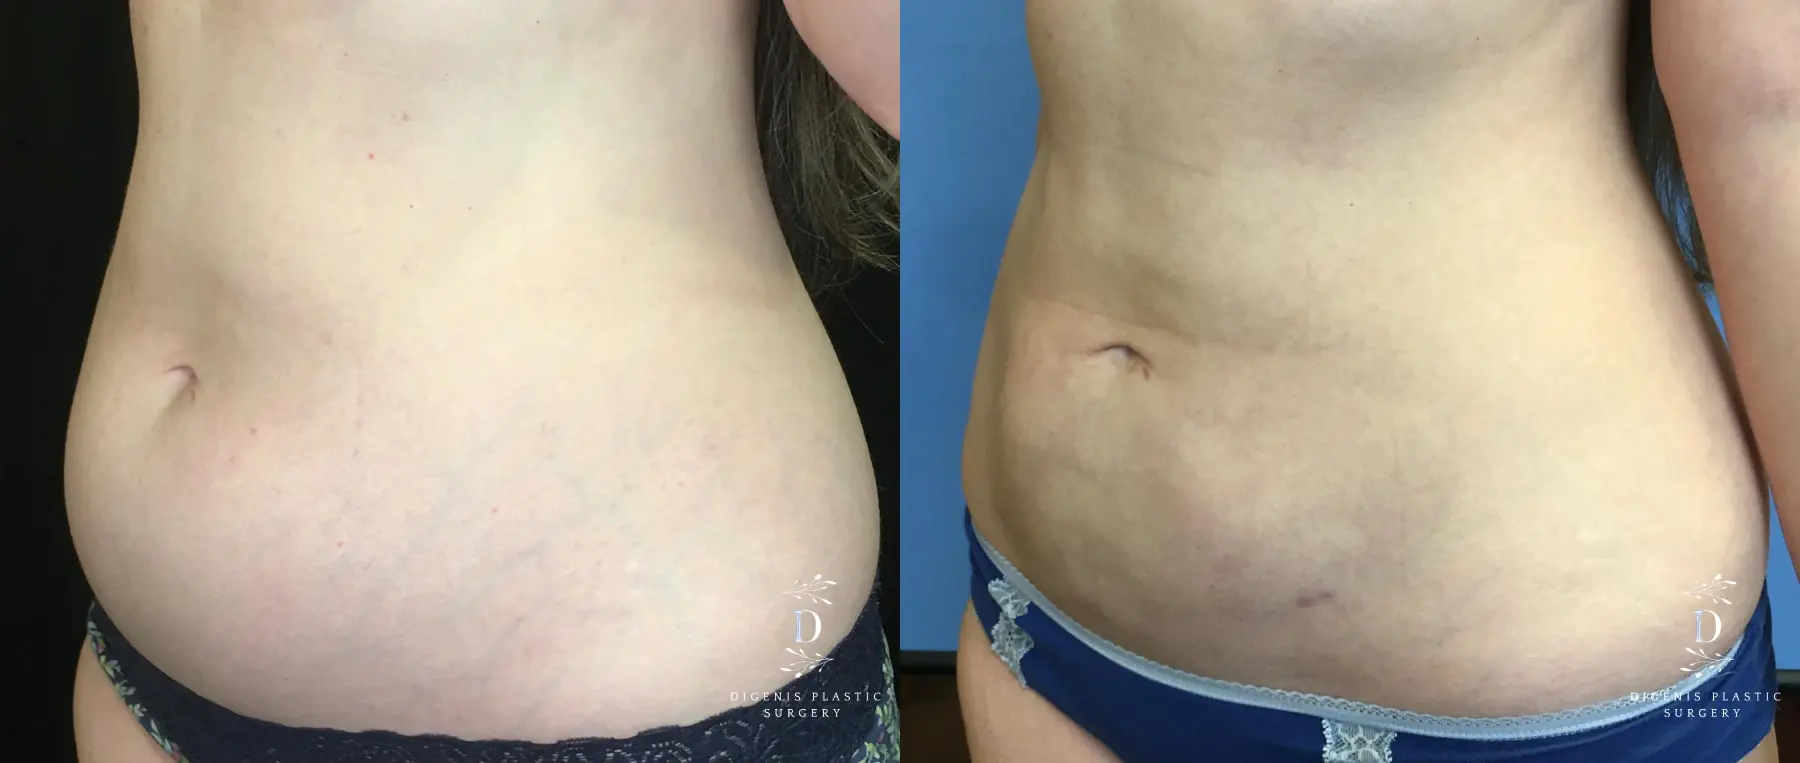 BodyTite: Patient 1 - Before and After 4